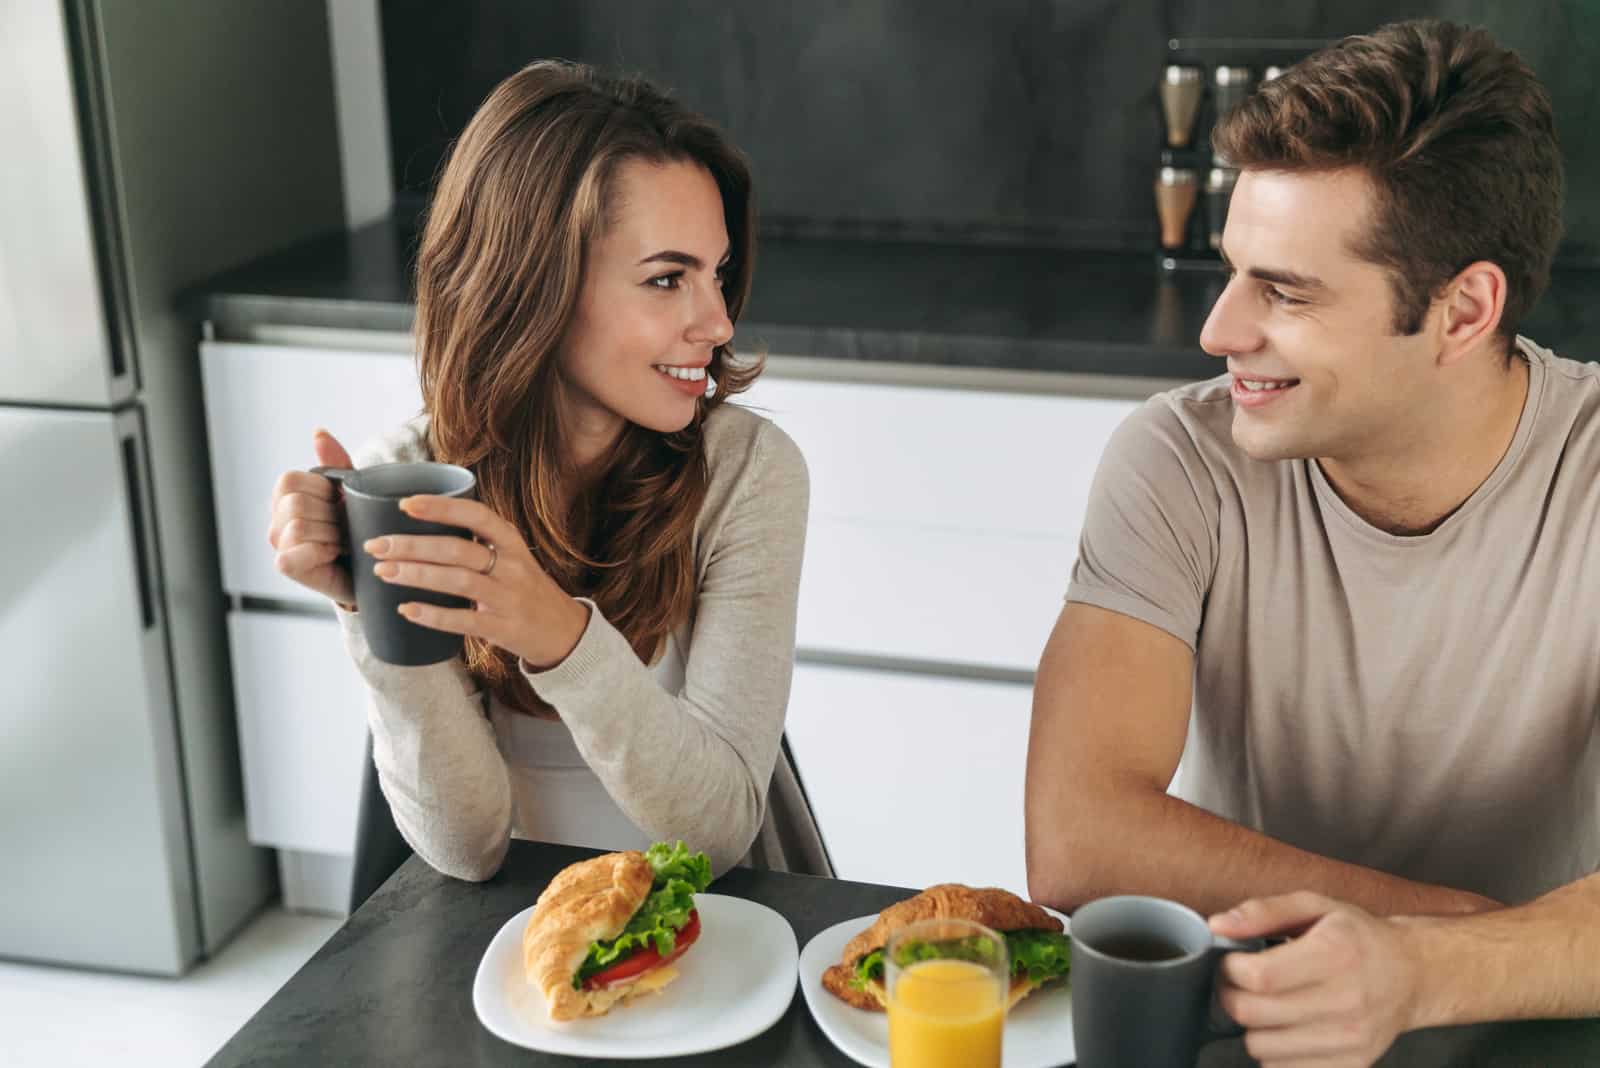 a smiling man and woman sitting in the kitchen talking